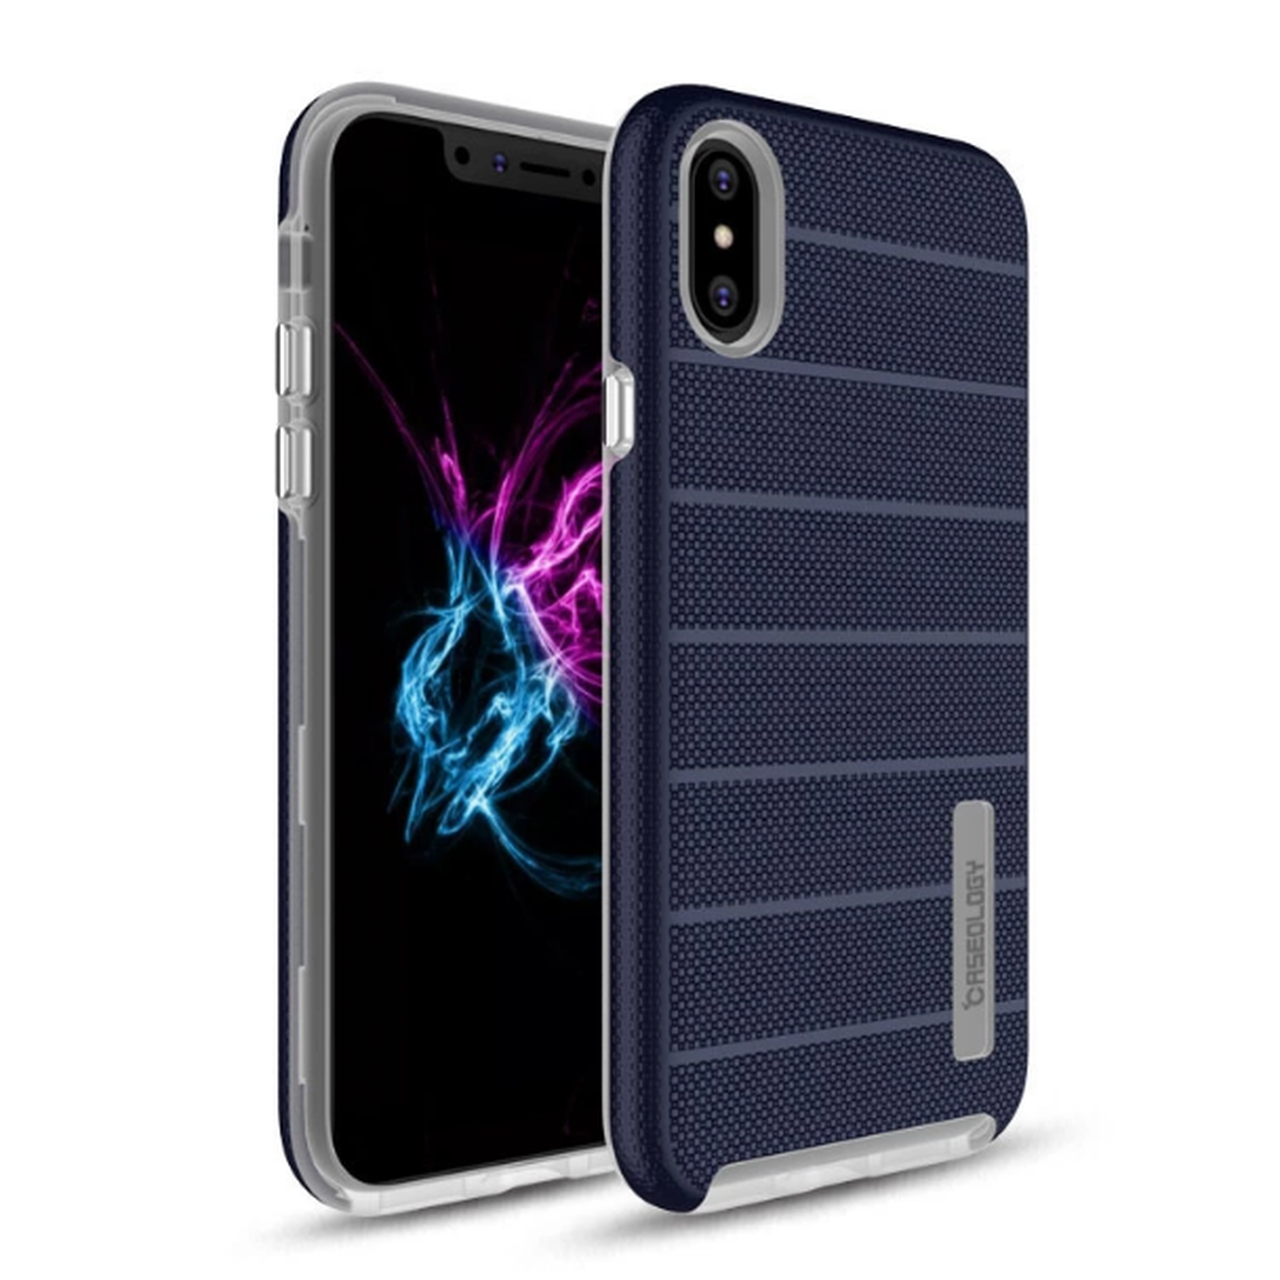 Caseology Hard Shell Fashion Case for iPhone Xs Max